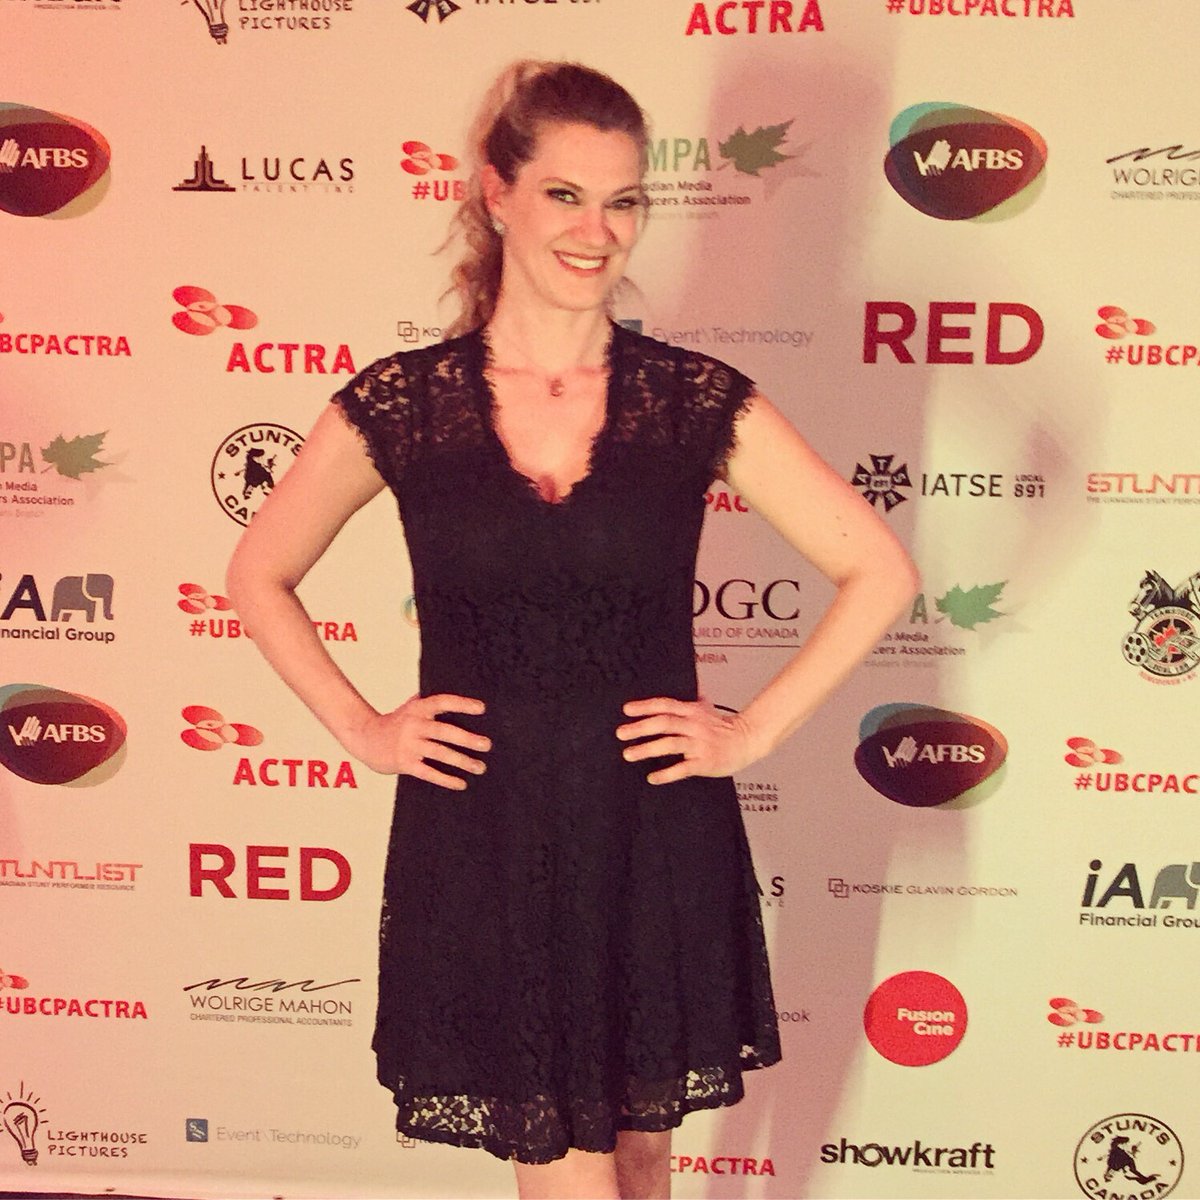 A night out celebrating this vibrant Vancouver community at the @UBCP_ACTRA awards!

#UBCPACTRA #ubcpactraawards2019